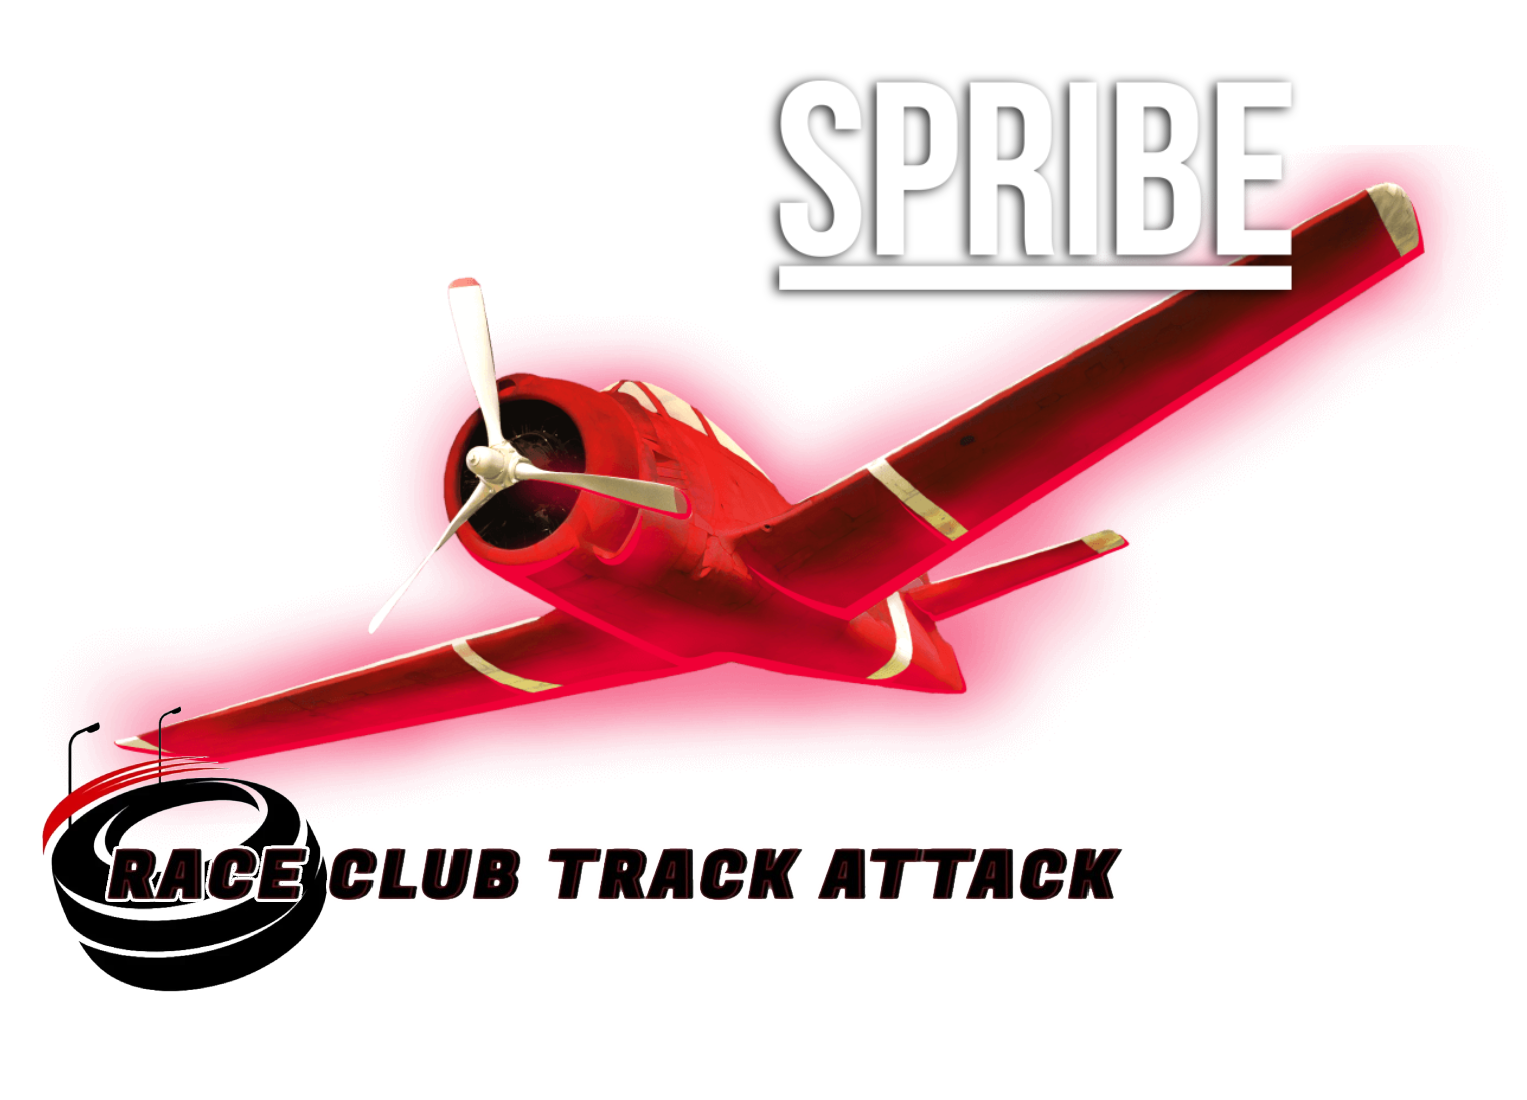 A flying red plane with Spribe and Trackattackracingclub logos